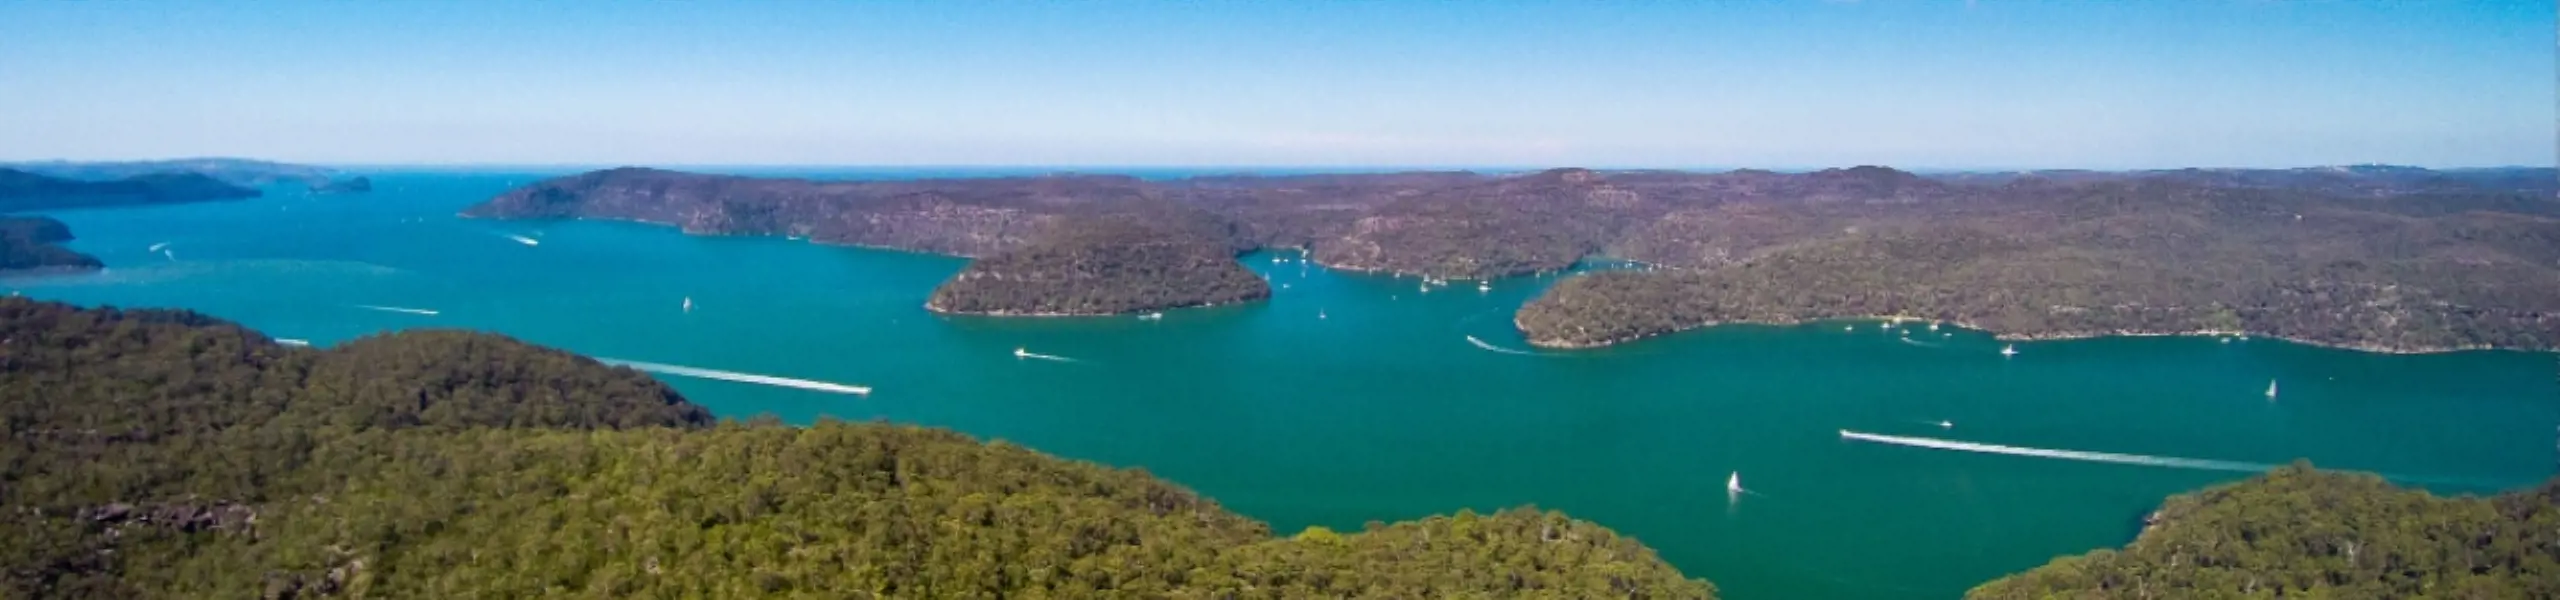 Have a great holiday exploring the vast Hawkesbury River on one of our boats